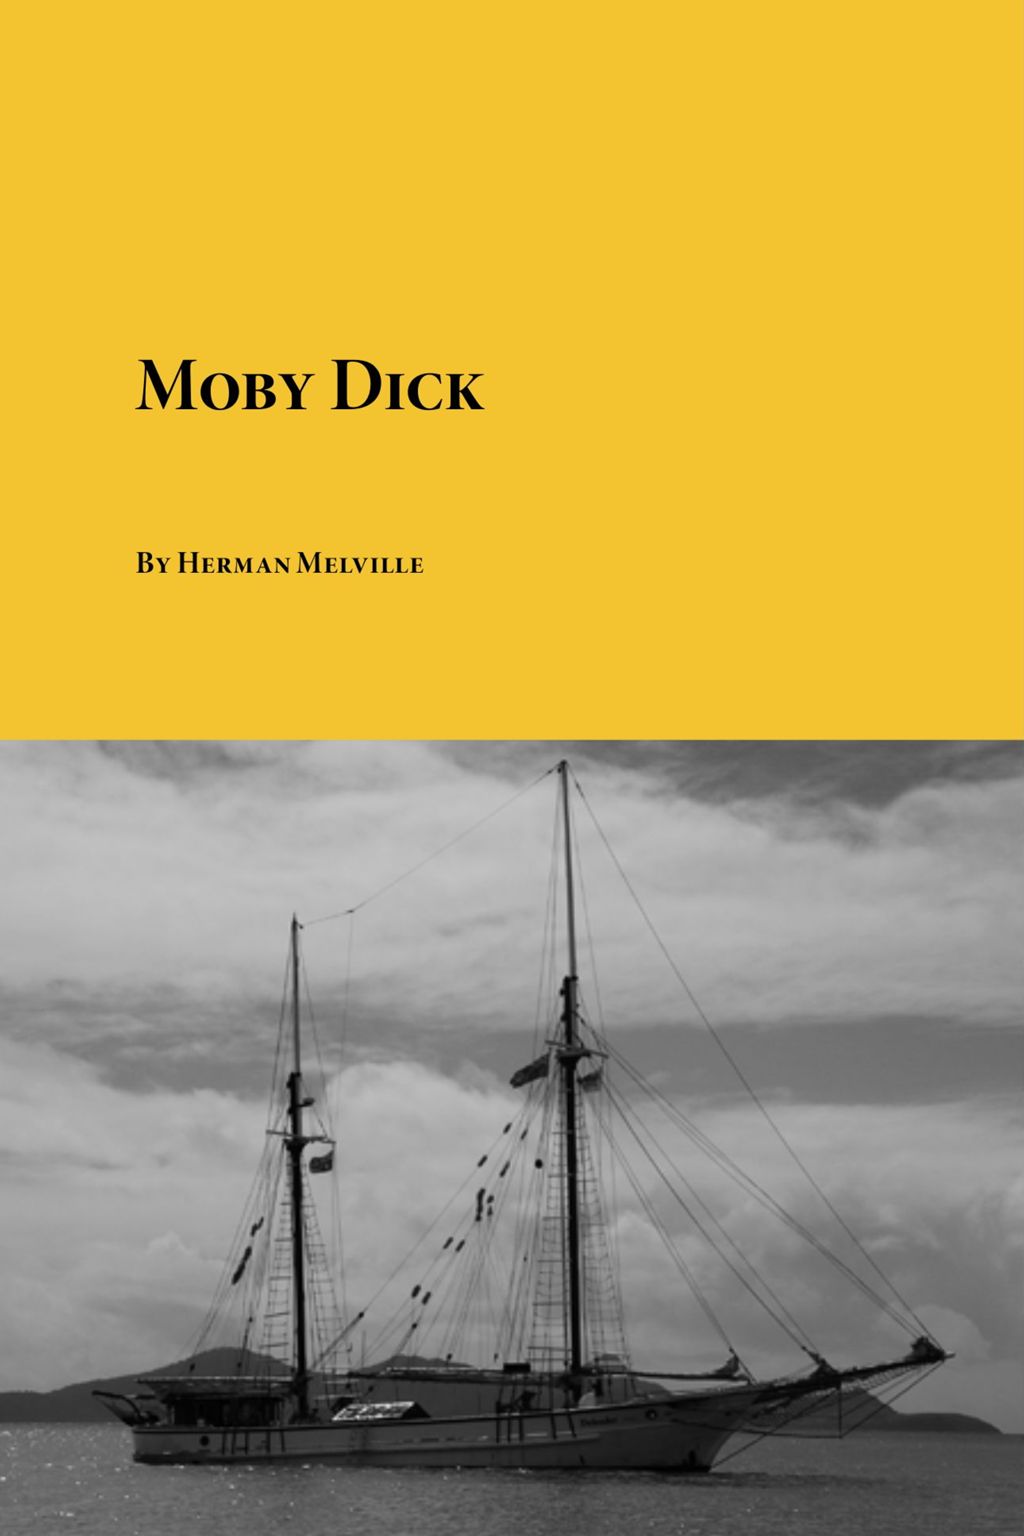 Miniature of Moby Dick